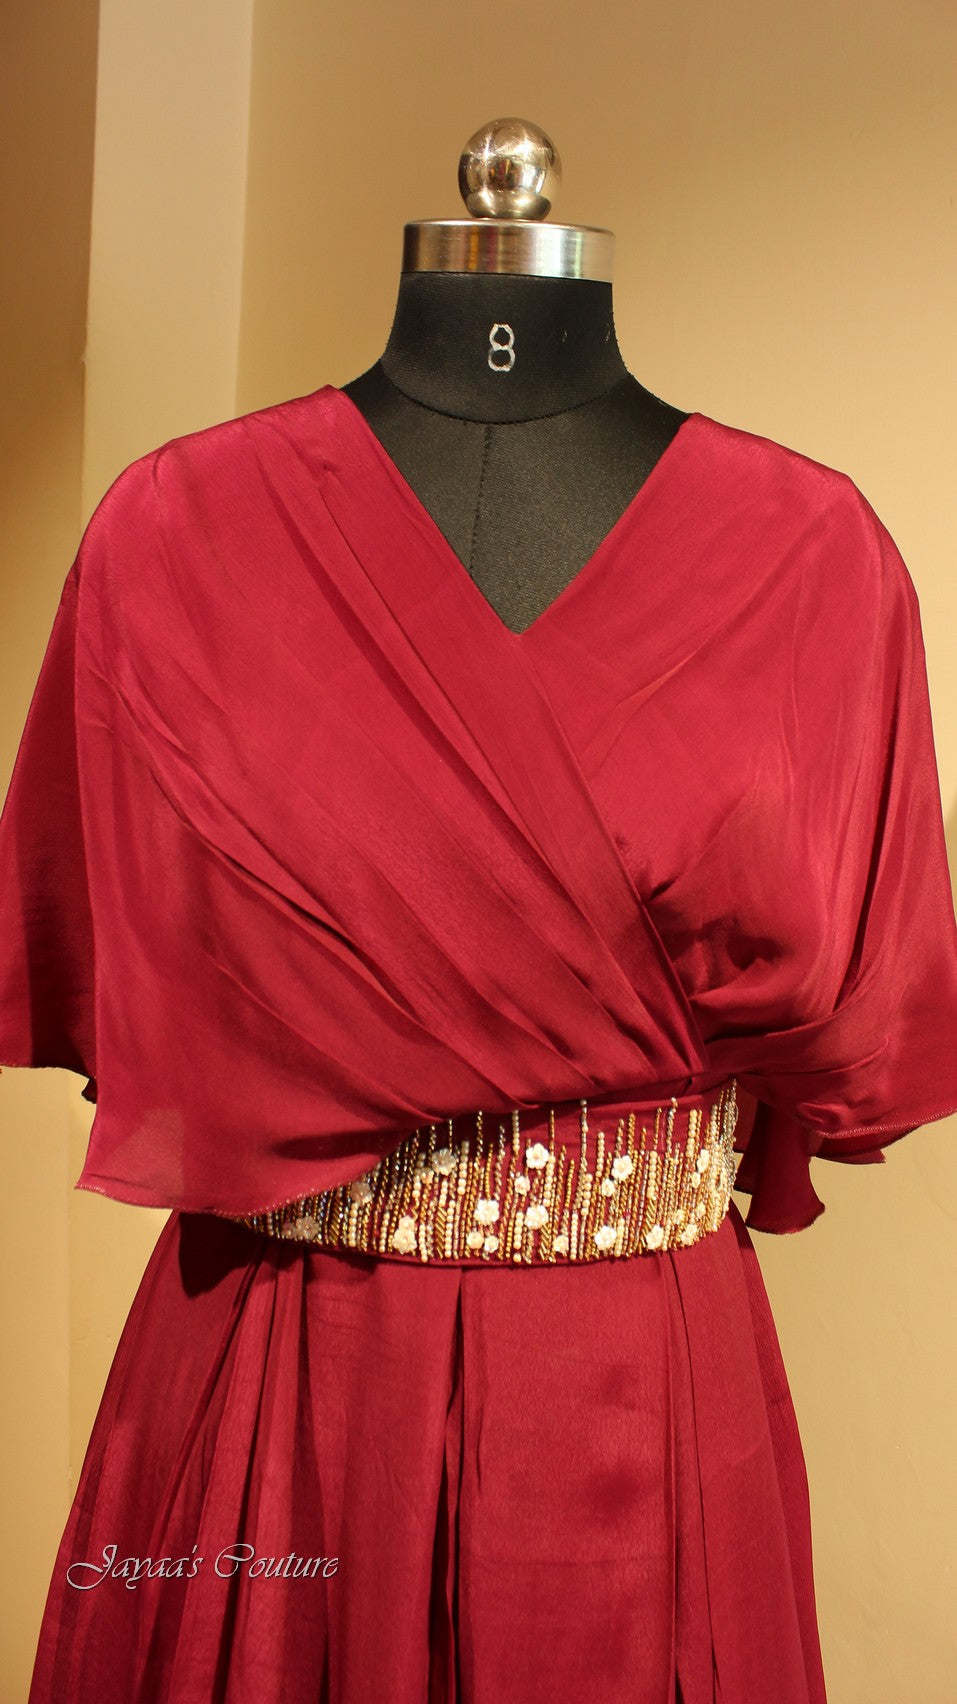 Maroon gown with belt